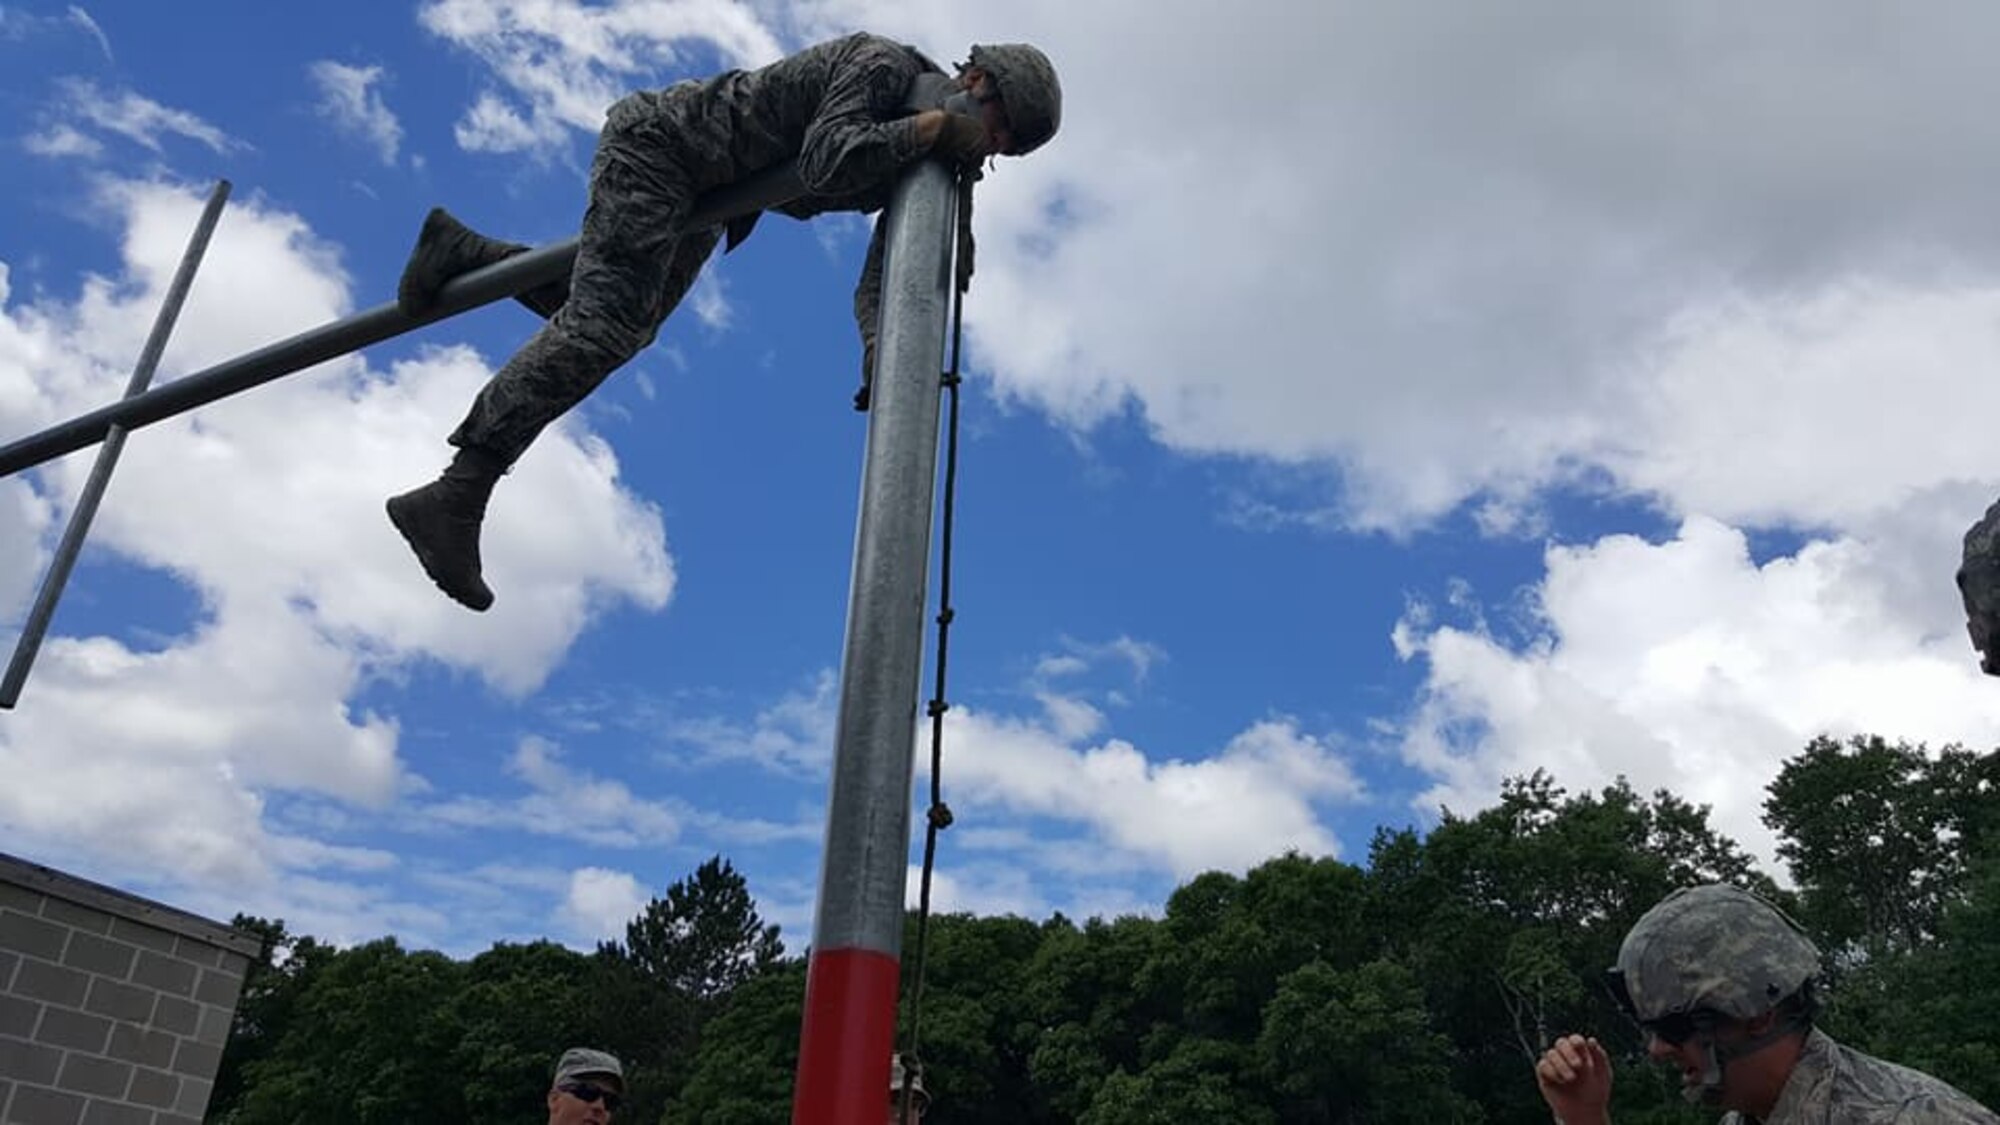 Members of the 934th Security Forces Squadron negotiate the Leadership Reaction Course at Camp Ripley, Minn. June 19 as part of their annual training. (Photo courtesy of Camp Ripley)